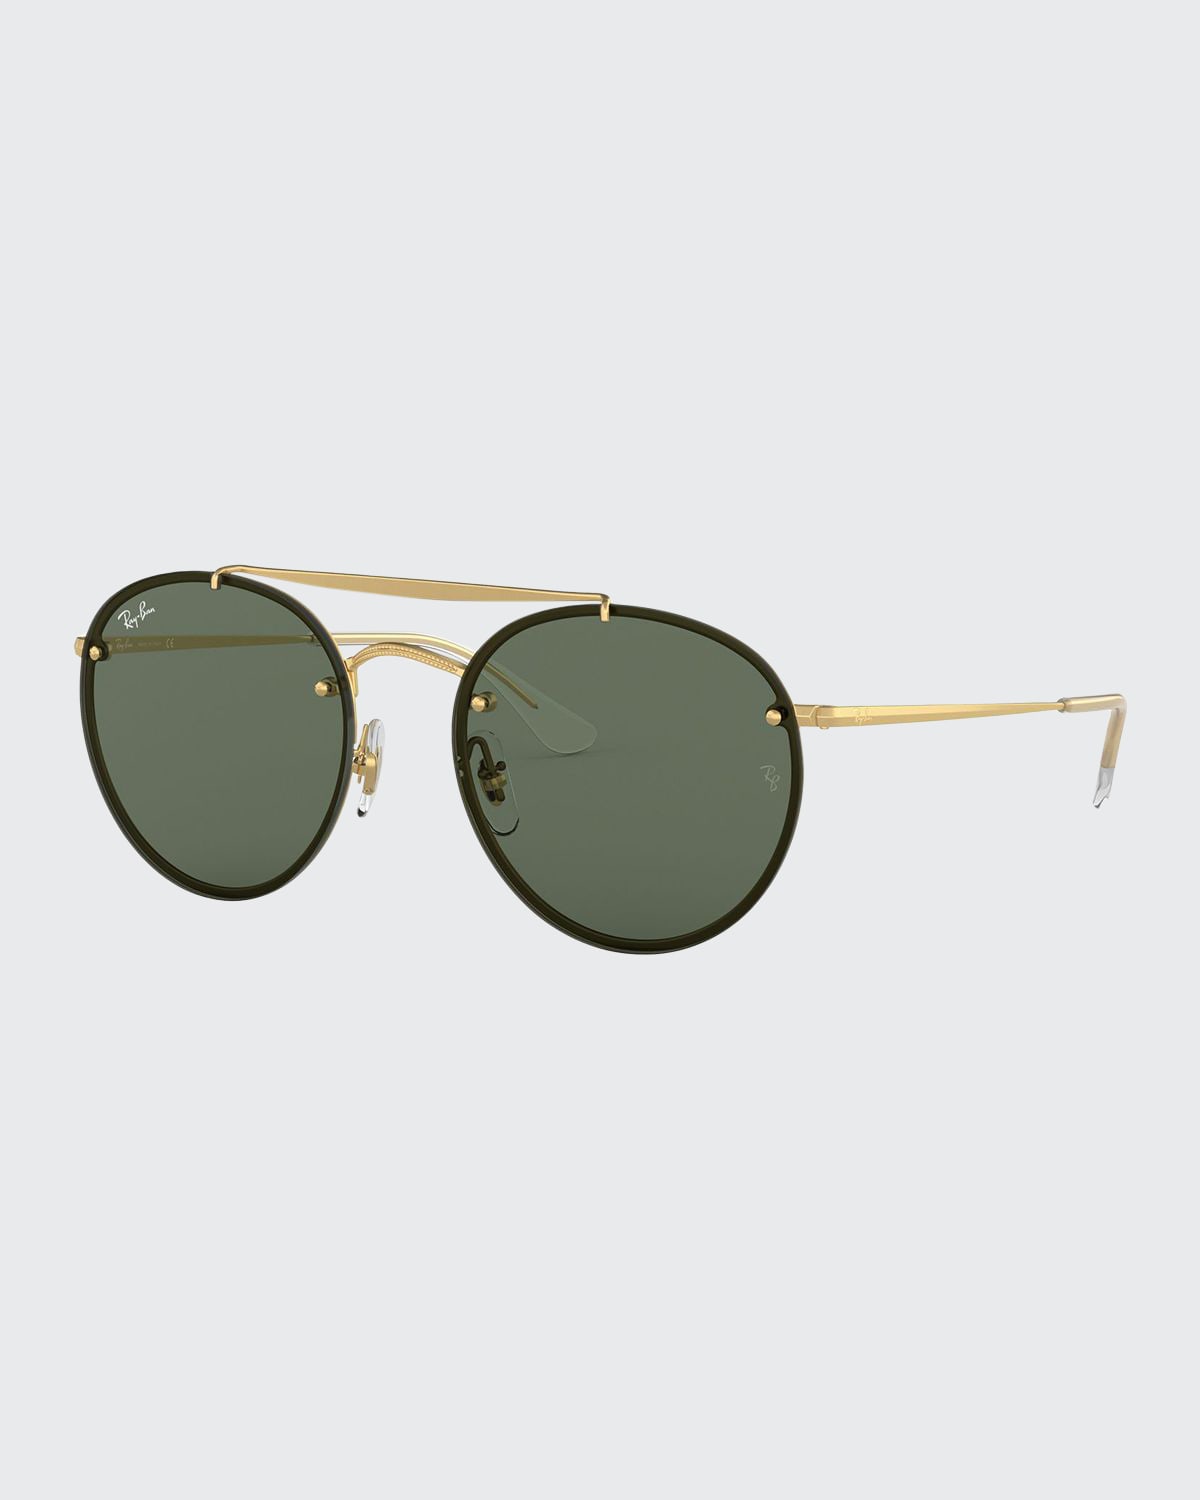 Ray Ban Round Lens-over-frame Metal Sunglasses In Green / Gold